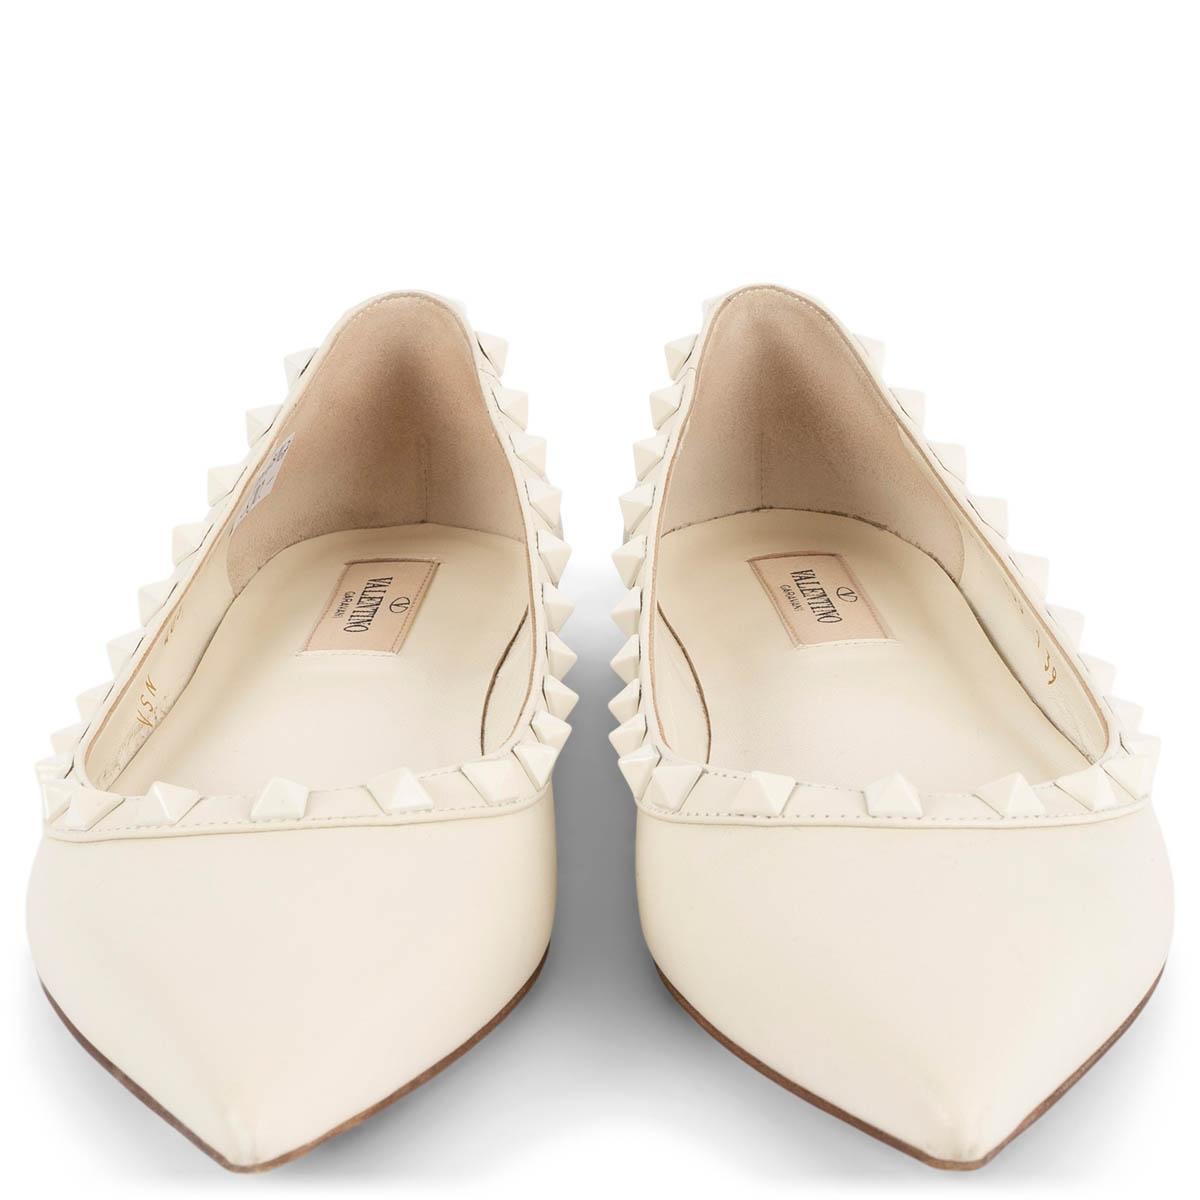 100% authentic Valentino Rockstud pointed-toe flats in ivory leather embellished with tonal signature studs. Have been worn and are in excellent condition.

Measurements
Imprinted Size	39
Shoe Size	39
Inside Sole	26cm (10.1in)
Width	8cm (3.1in)

All